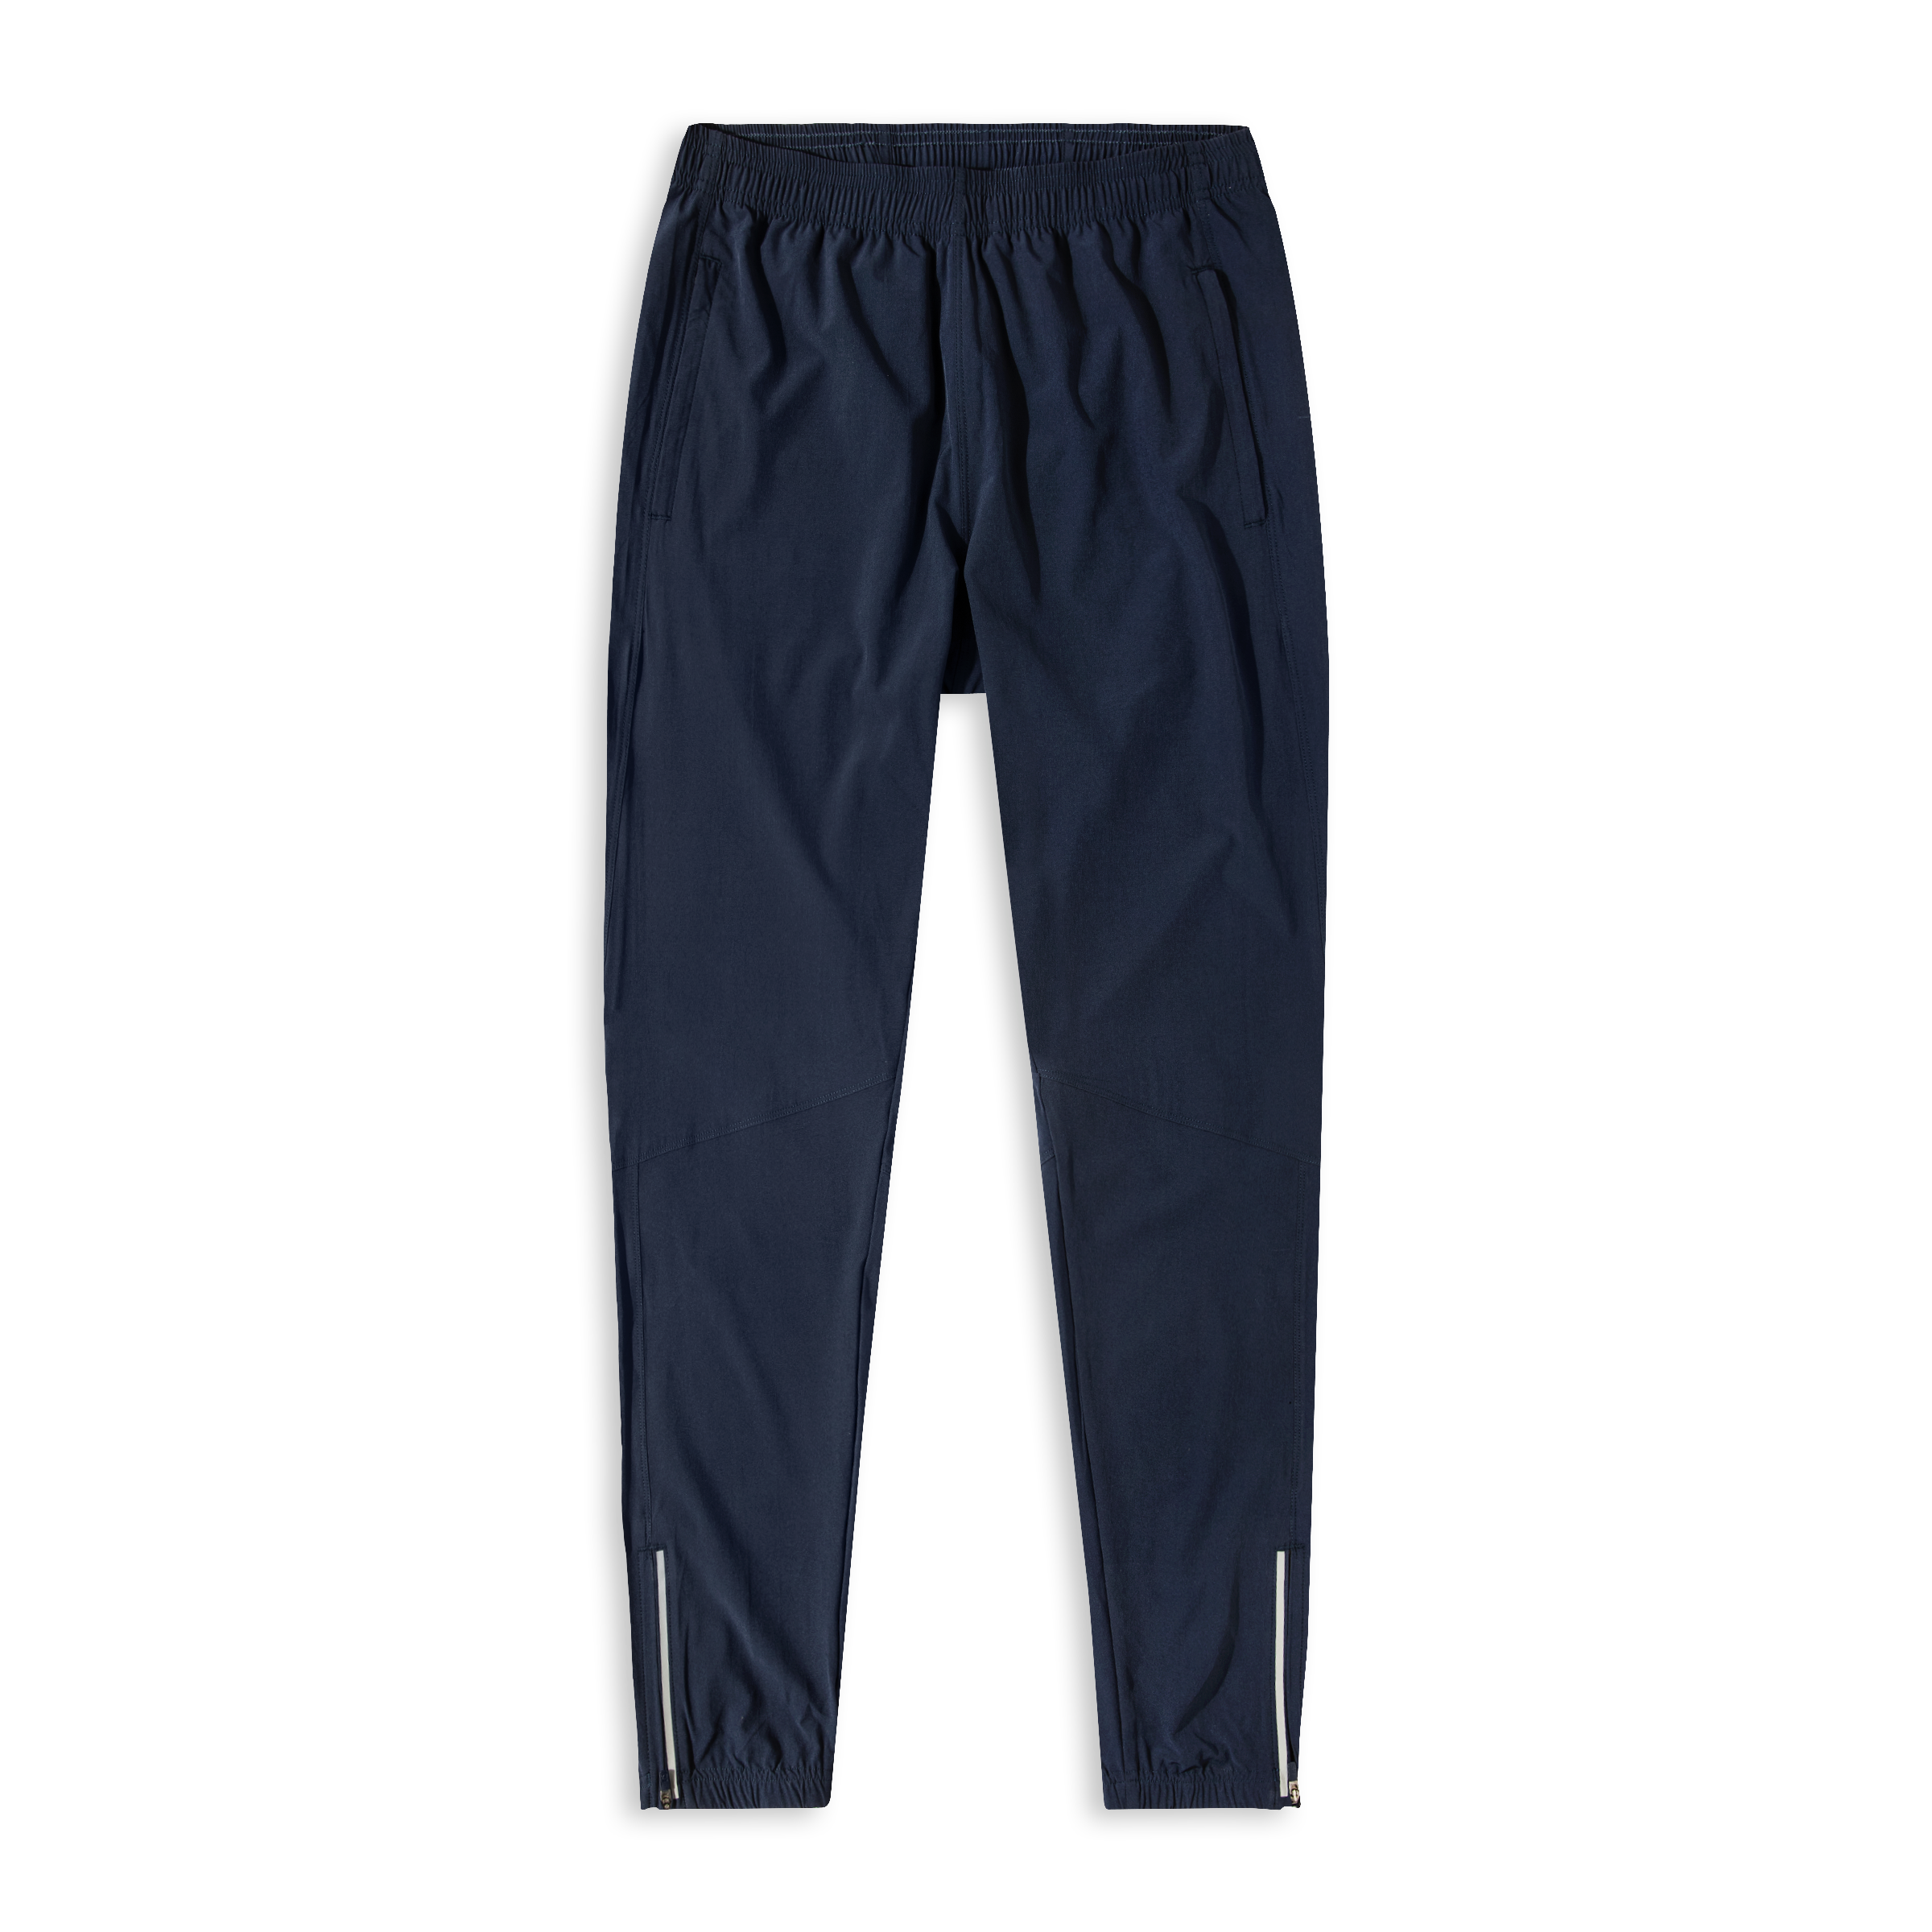 Run Jogger Navy front with Elastic Waistband, Zippered Side Pockets, Zipper at ankles, and Reflective strip at side seam/bottom hem